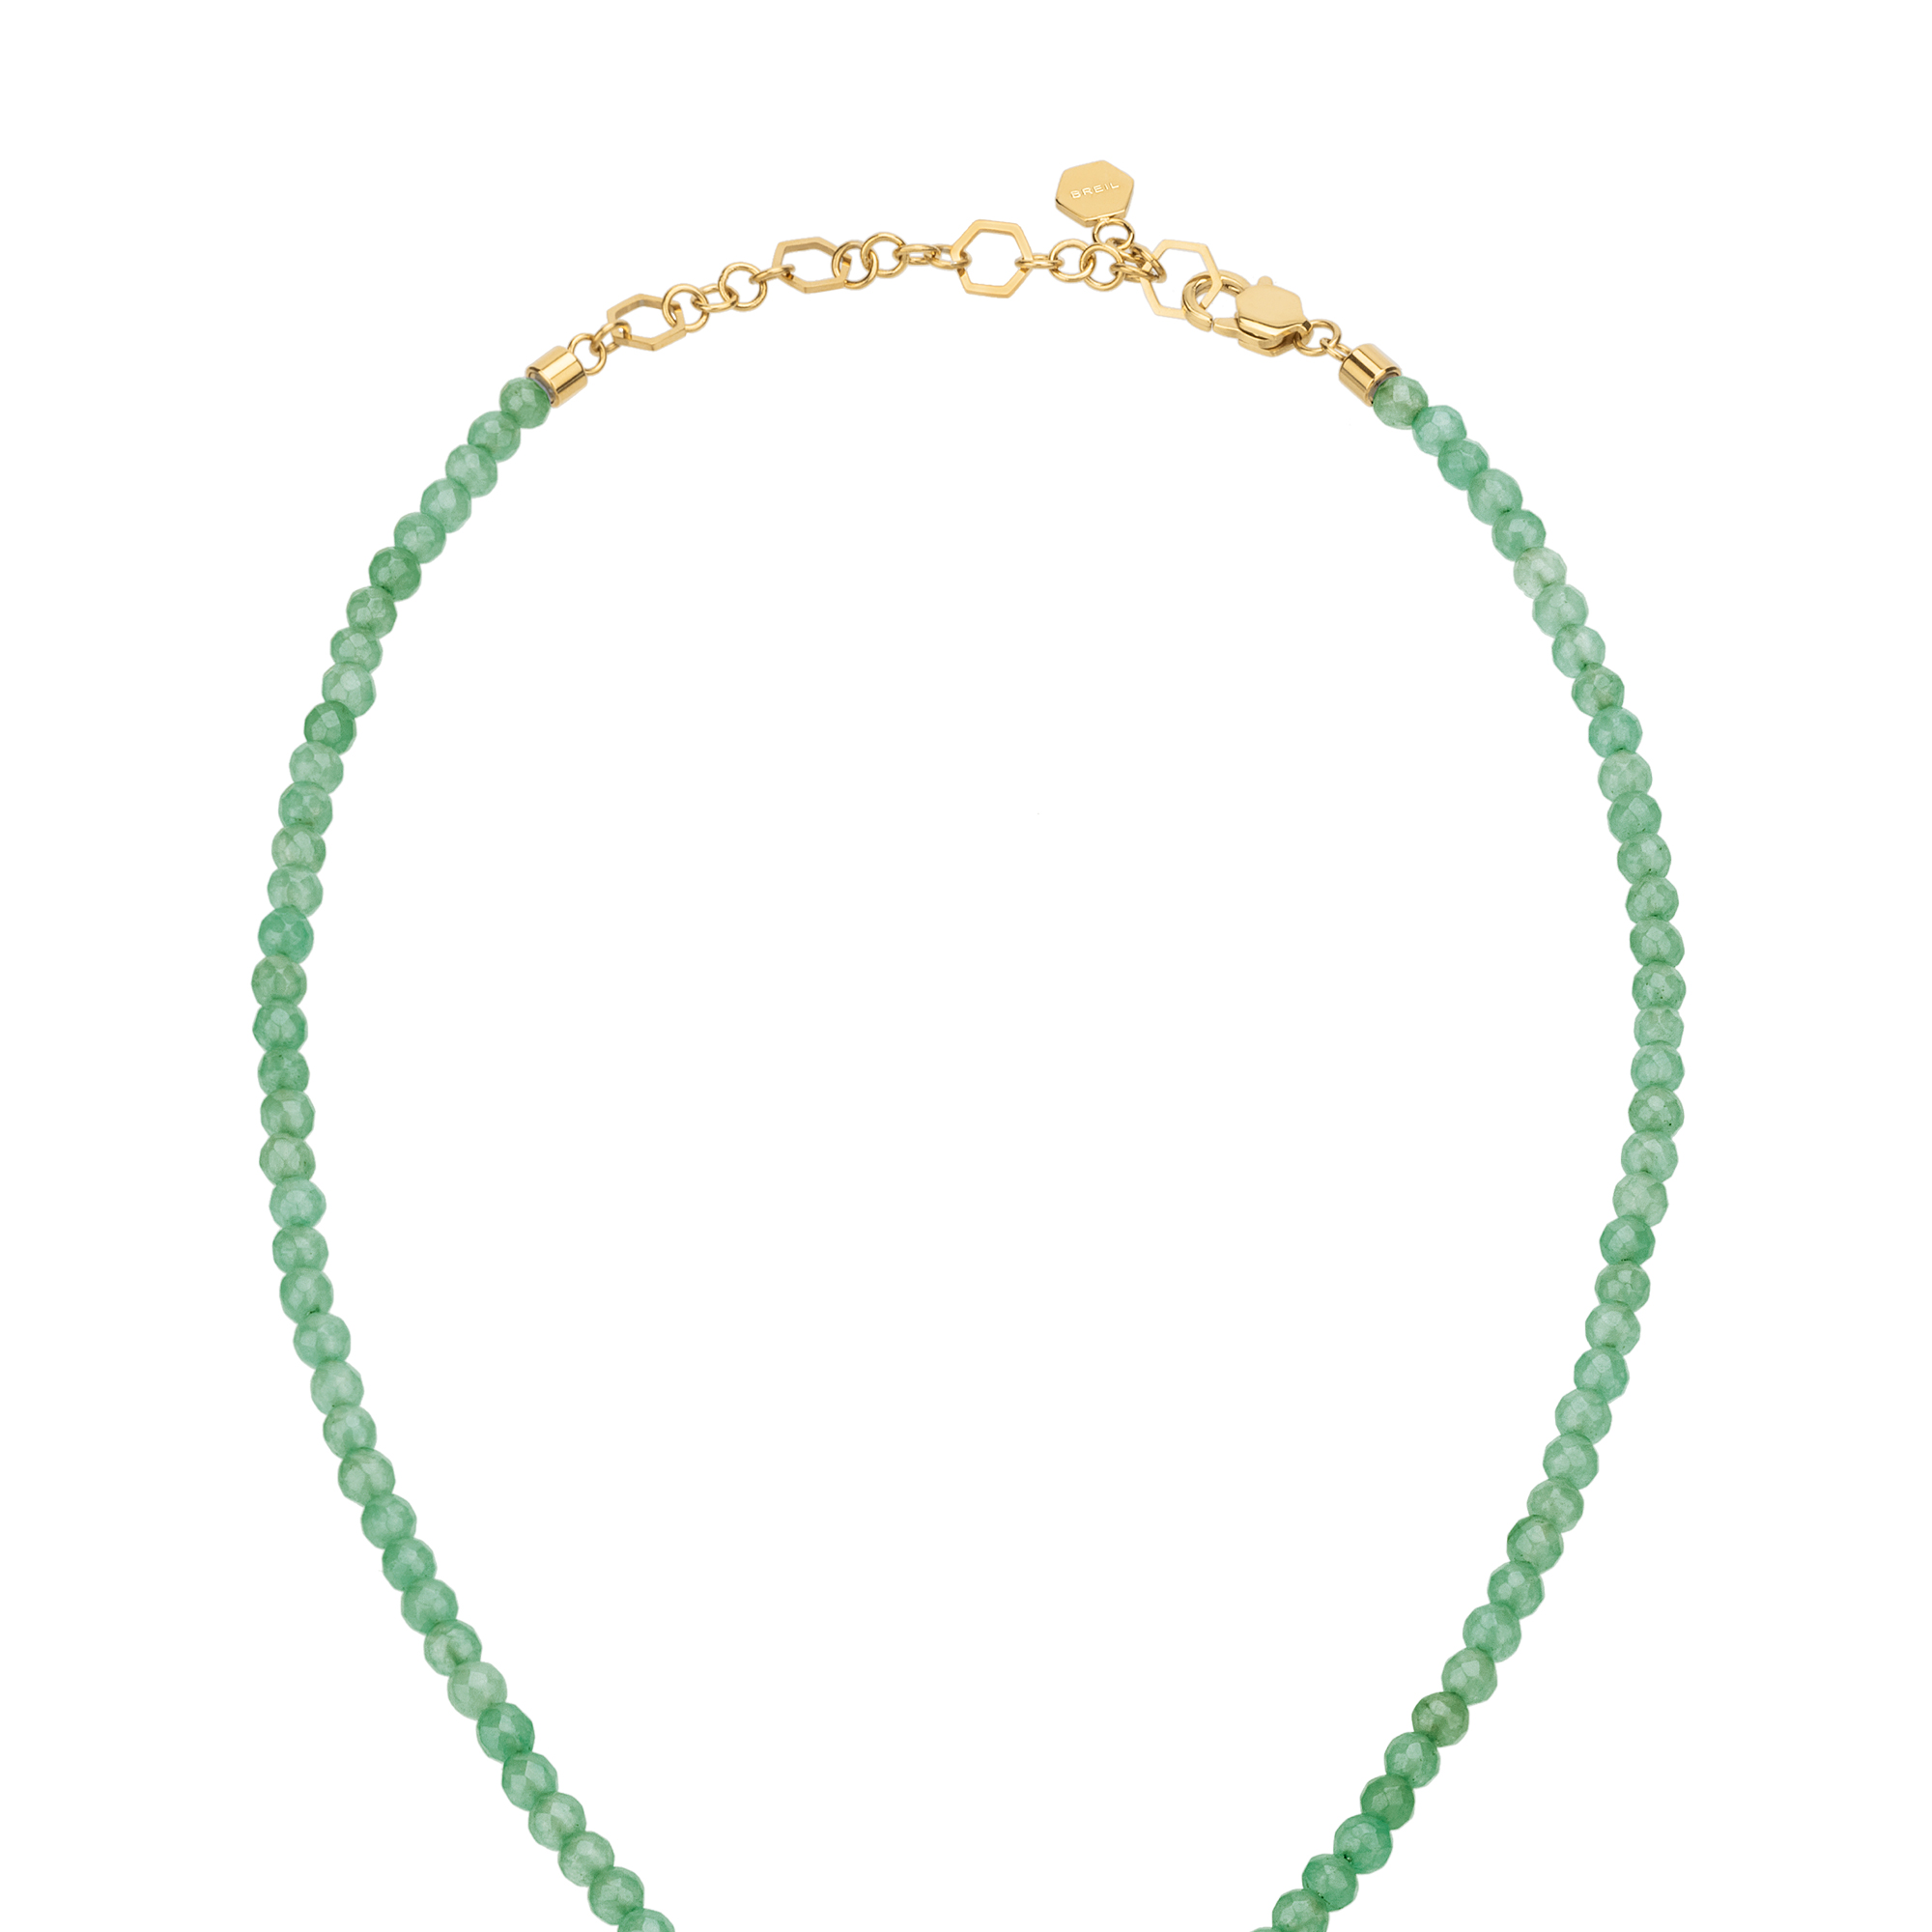 PRIVATE CODE - GREEN ADVENTURINE NECKLACE WITH IP GOLD STEEL PENDANT - 3 - TJ3152 | Breil